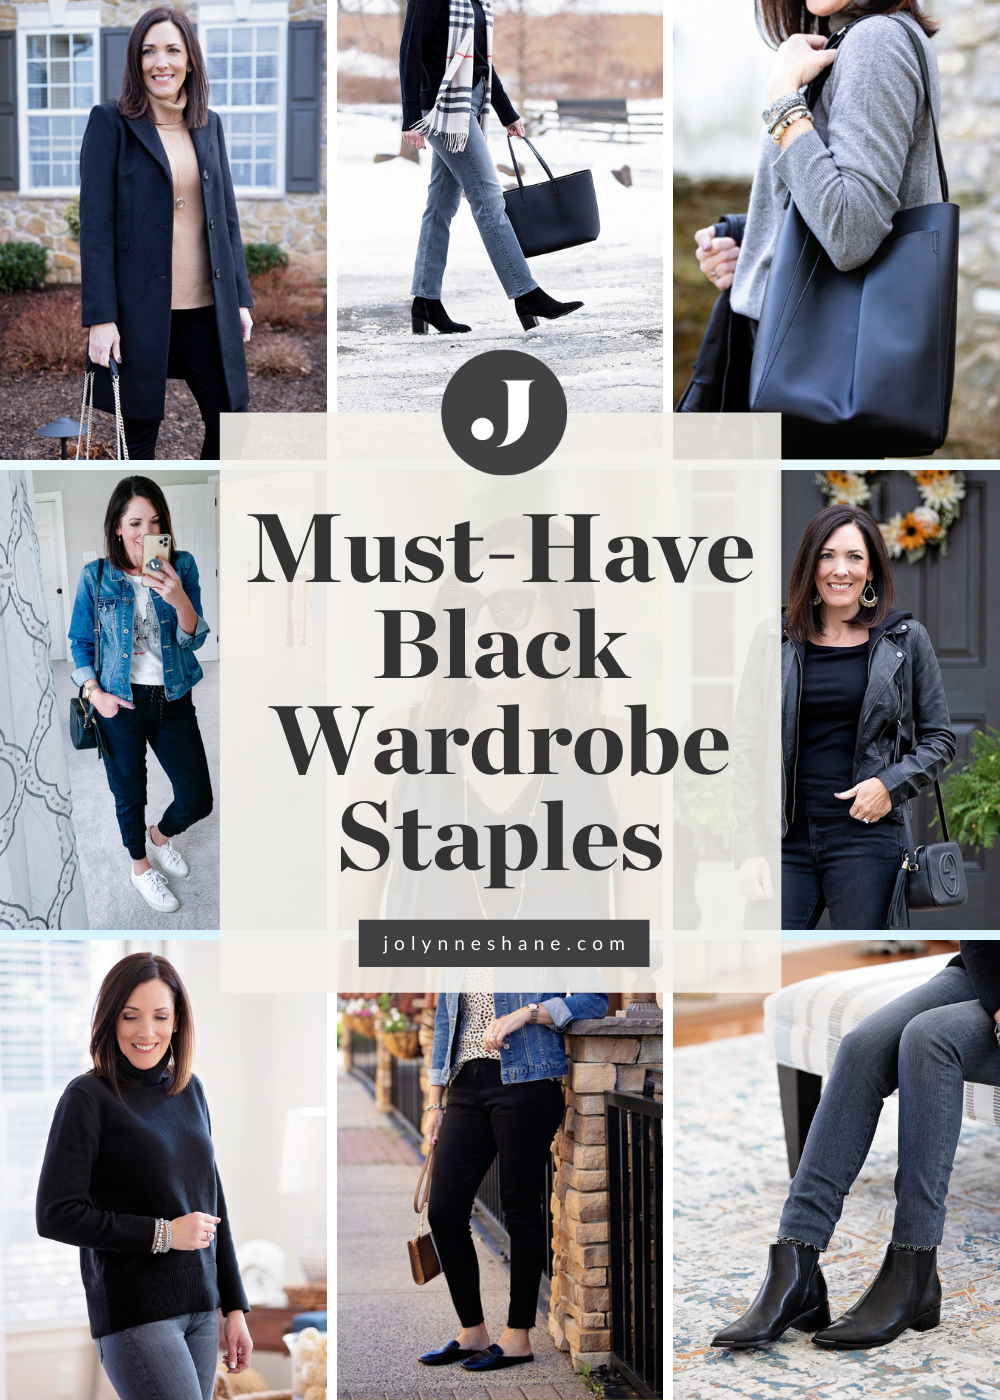 Essential Wardrobe Staples for the Modern Working Woman